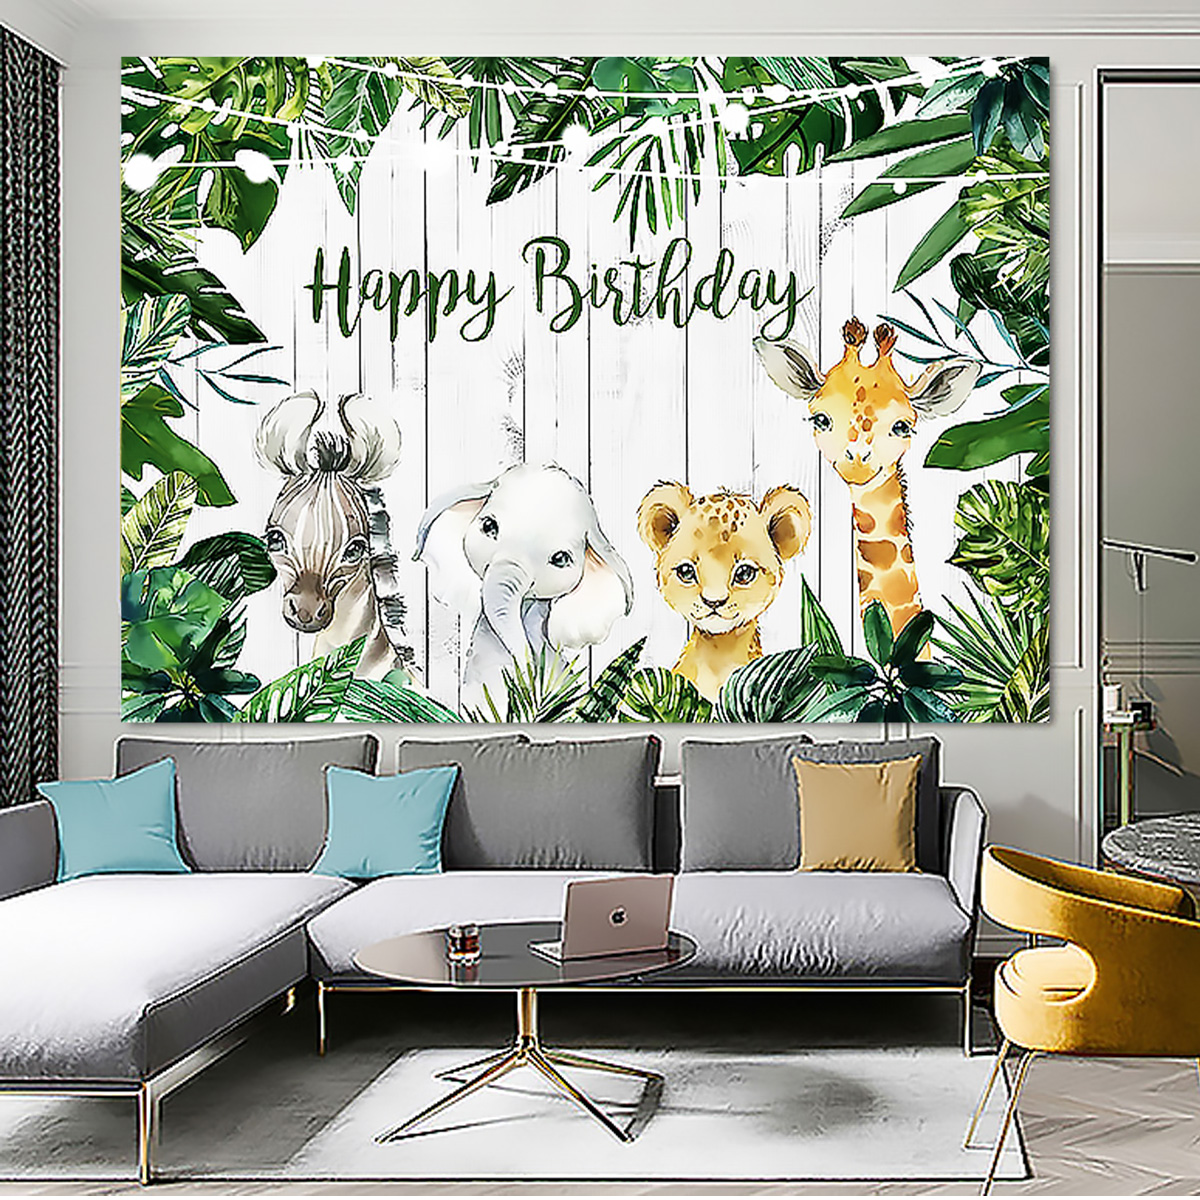 3-Size-Jungle-Green-Forest-Backdrop-Happy-Birthday-Background-Photography-Woodland-Party-Prop-1876181-12